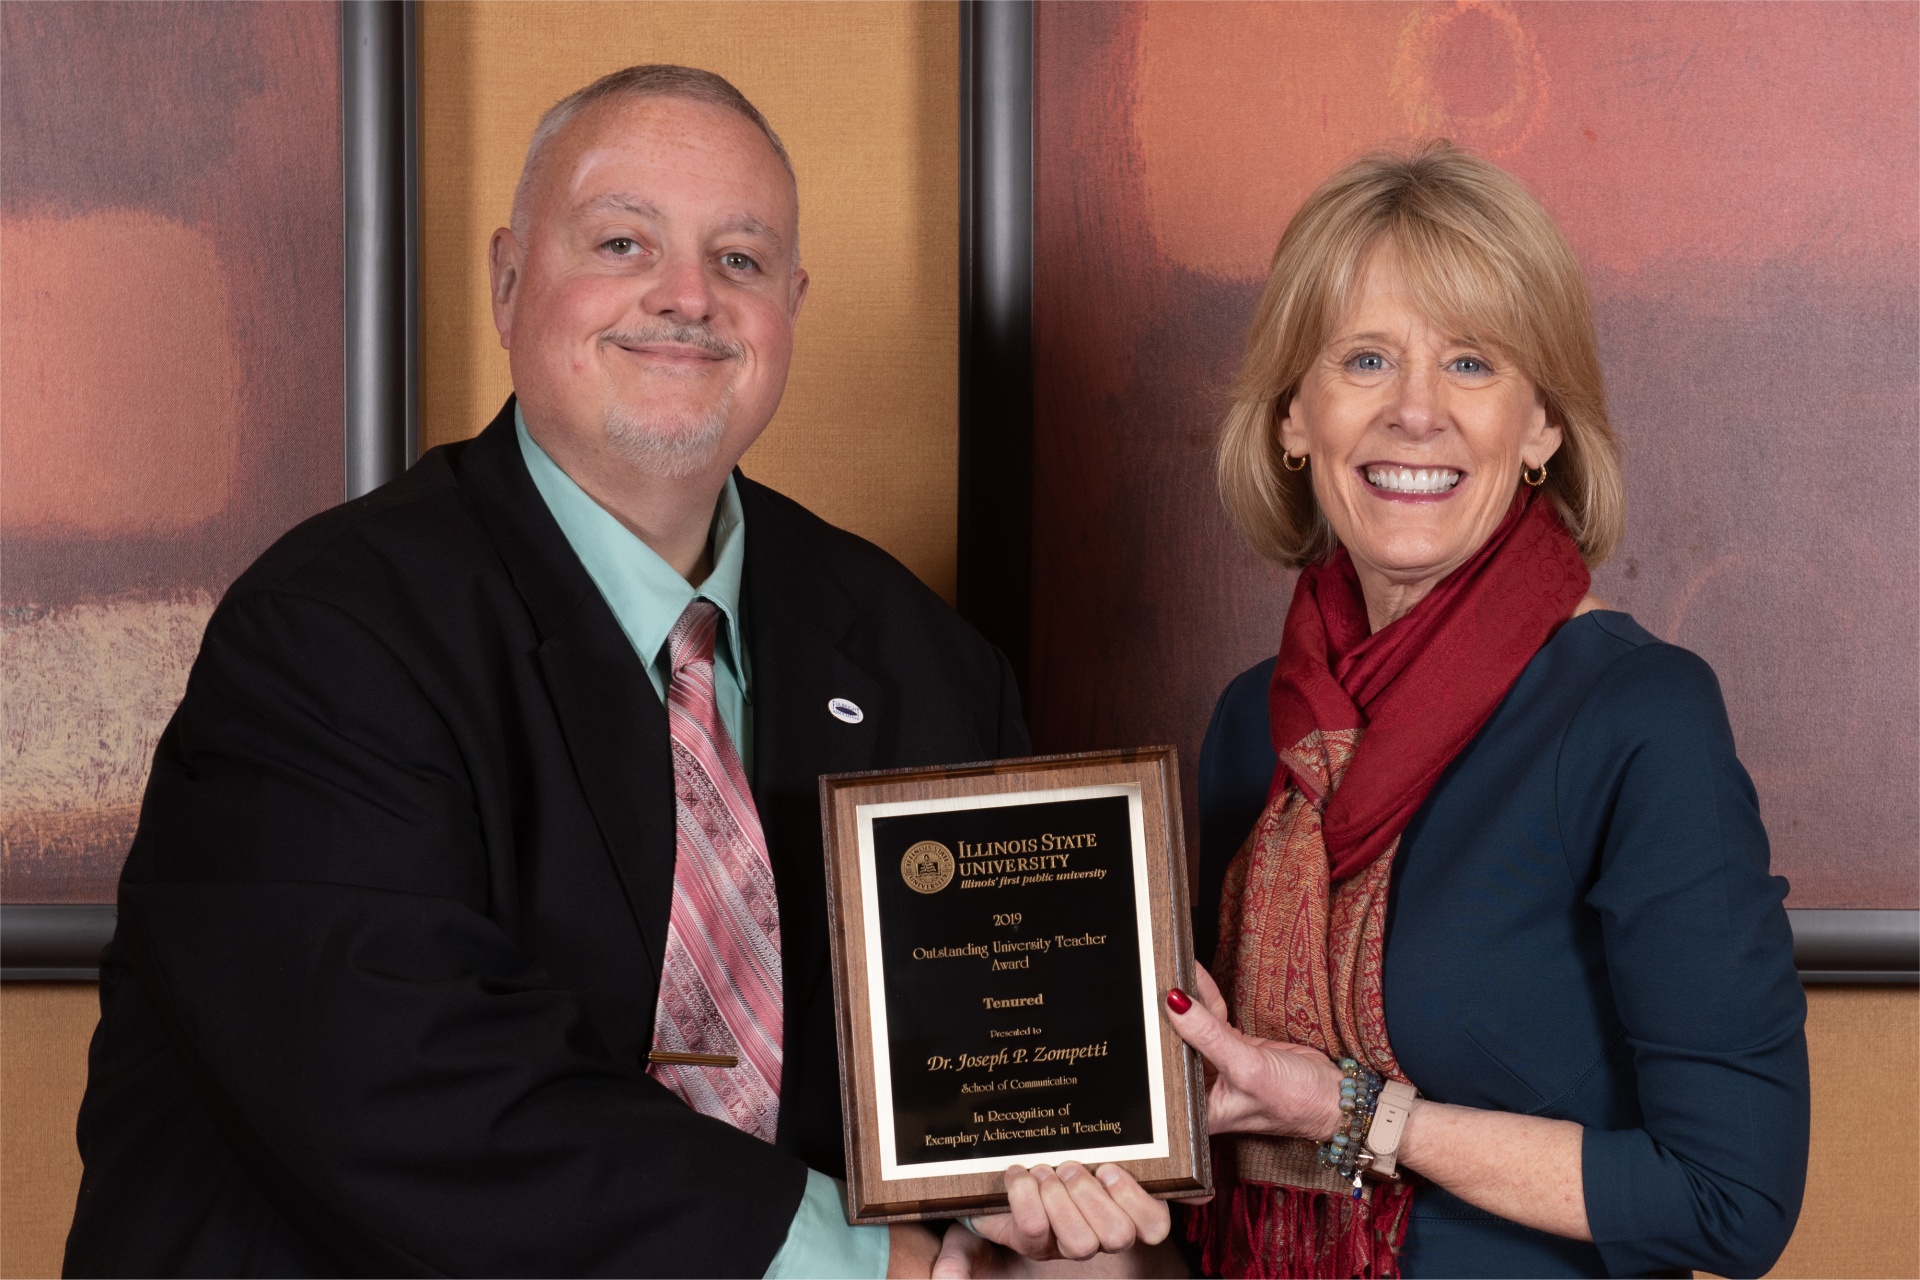 Provost Dr. Jan Murphy presents an Outstanding University Teaching Award to Dr. Joseph Zompetti, School of Communication, who was one of three faculty members so honored at the recent Teaching & Learning Symposium.